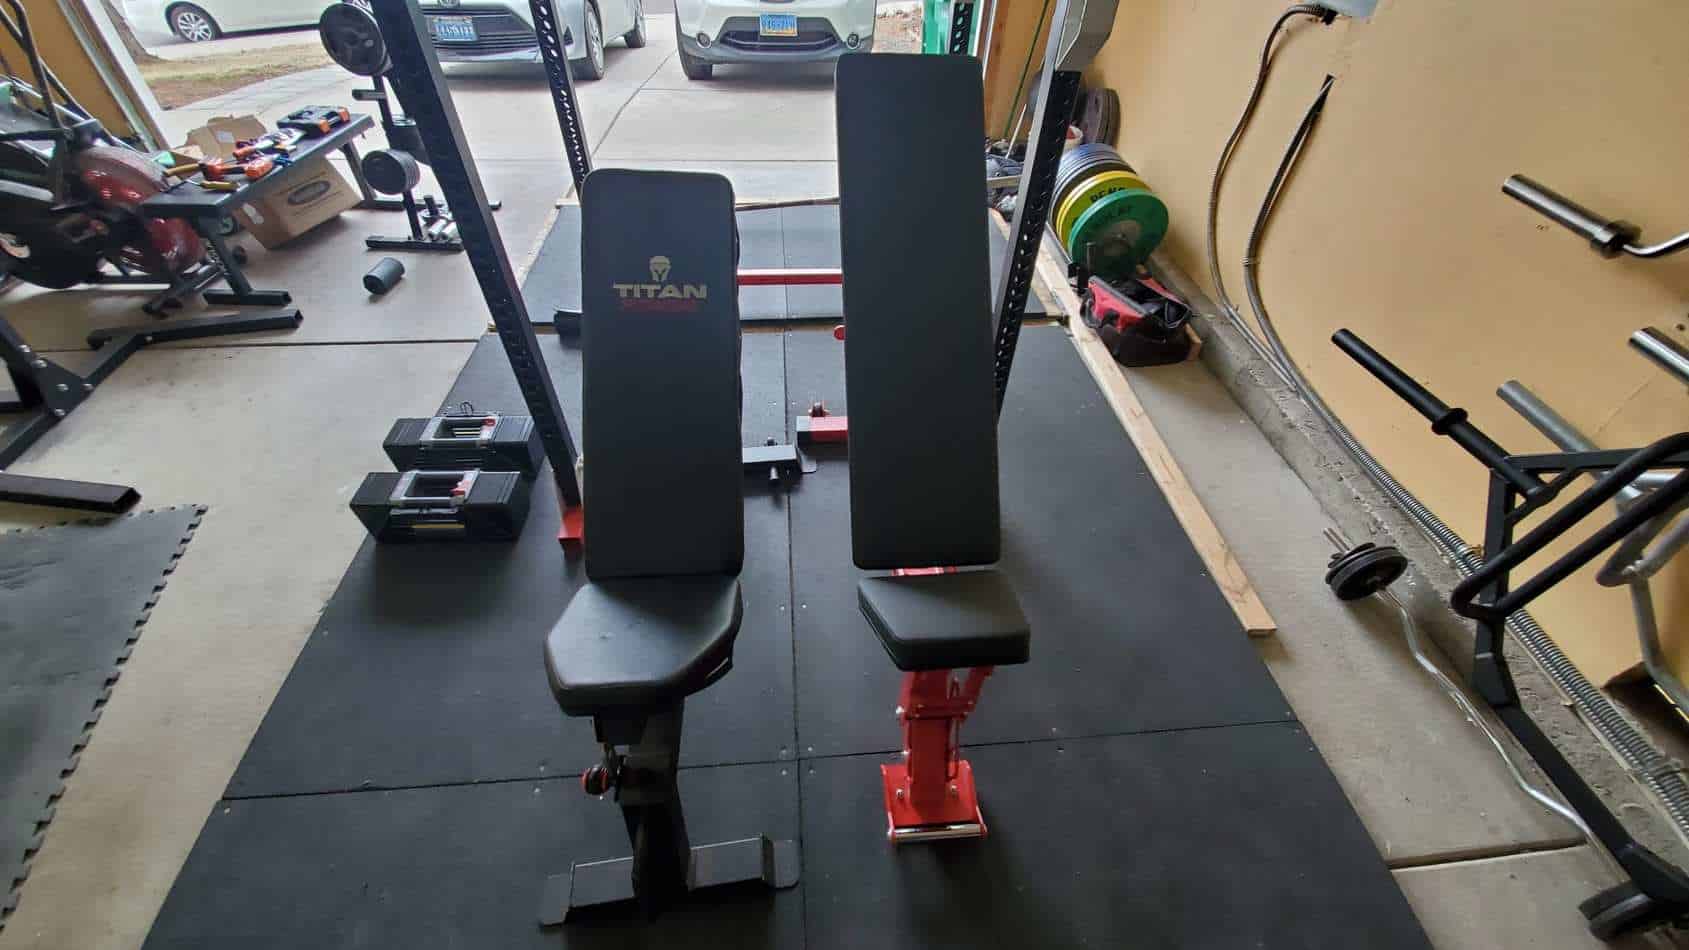 titan adjustable bench and rep fitness ab-5200 adjustable bench comparison